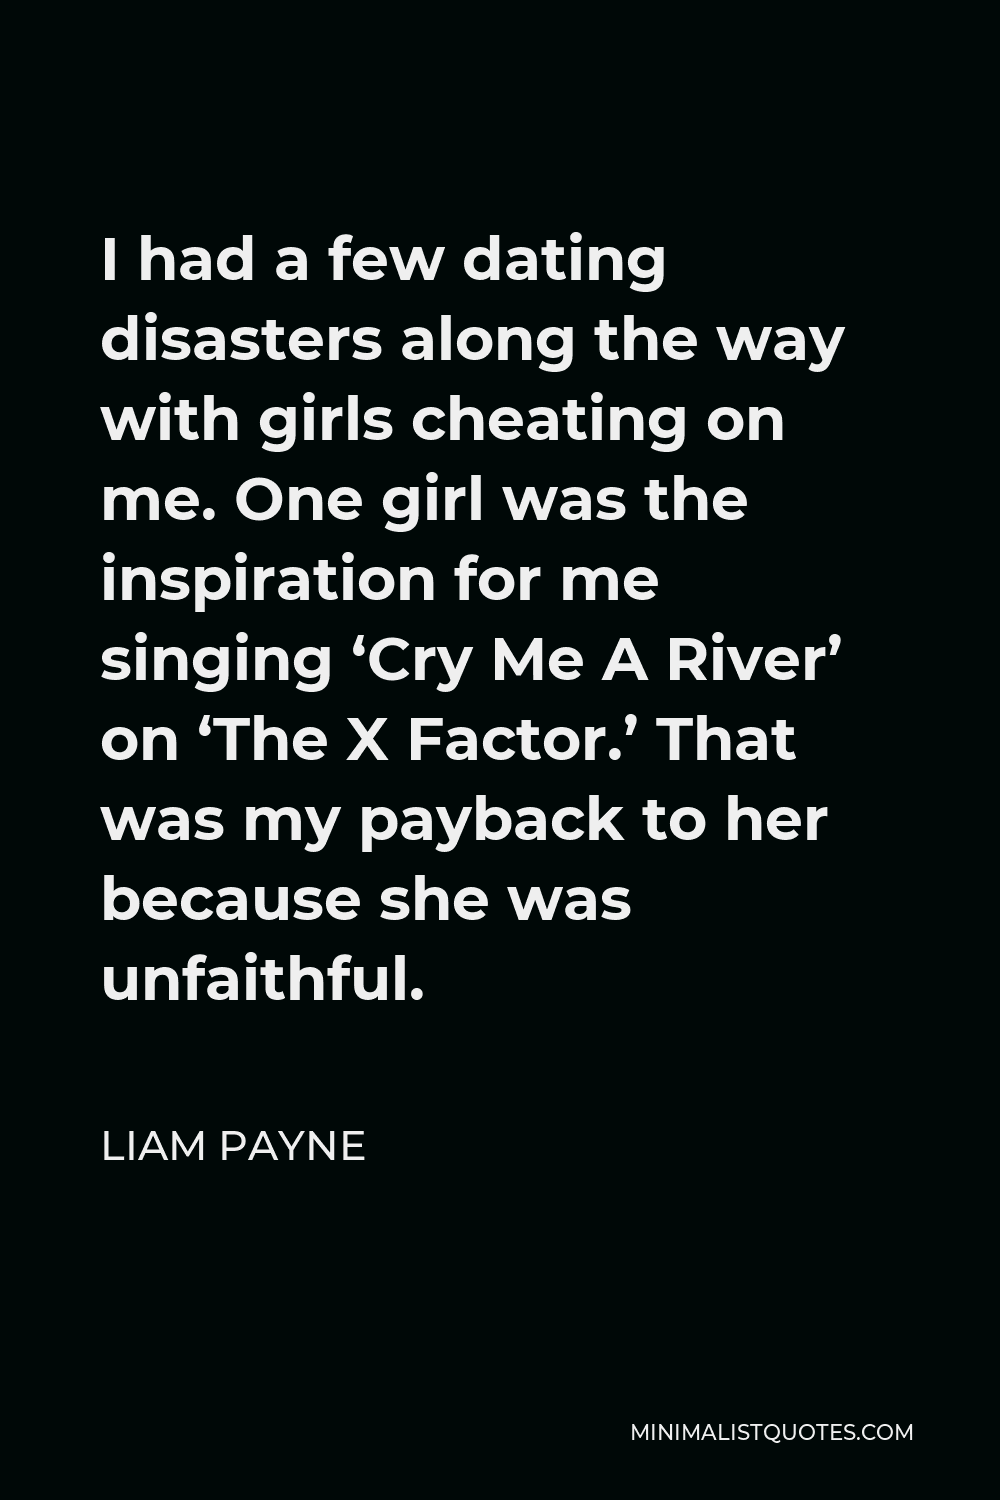 Liam Payne Quote - I had a few dating disasters along the way with girls cheating on me. One girl was the inspiration for me singing ‘Cry Me A River’ on ‘The X Factor.’ That was my payback to her because she was unfaithful.